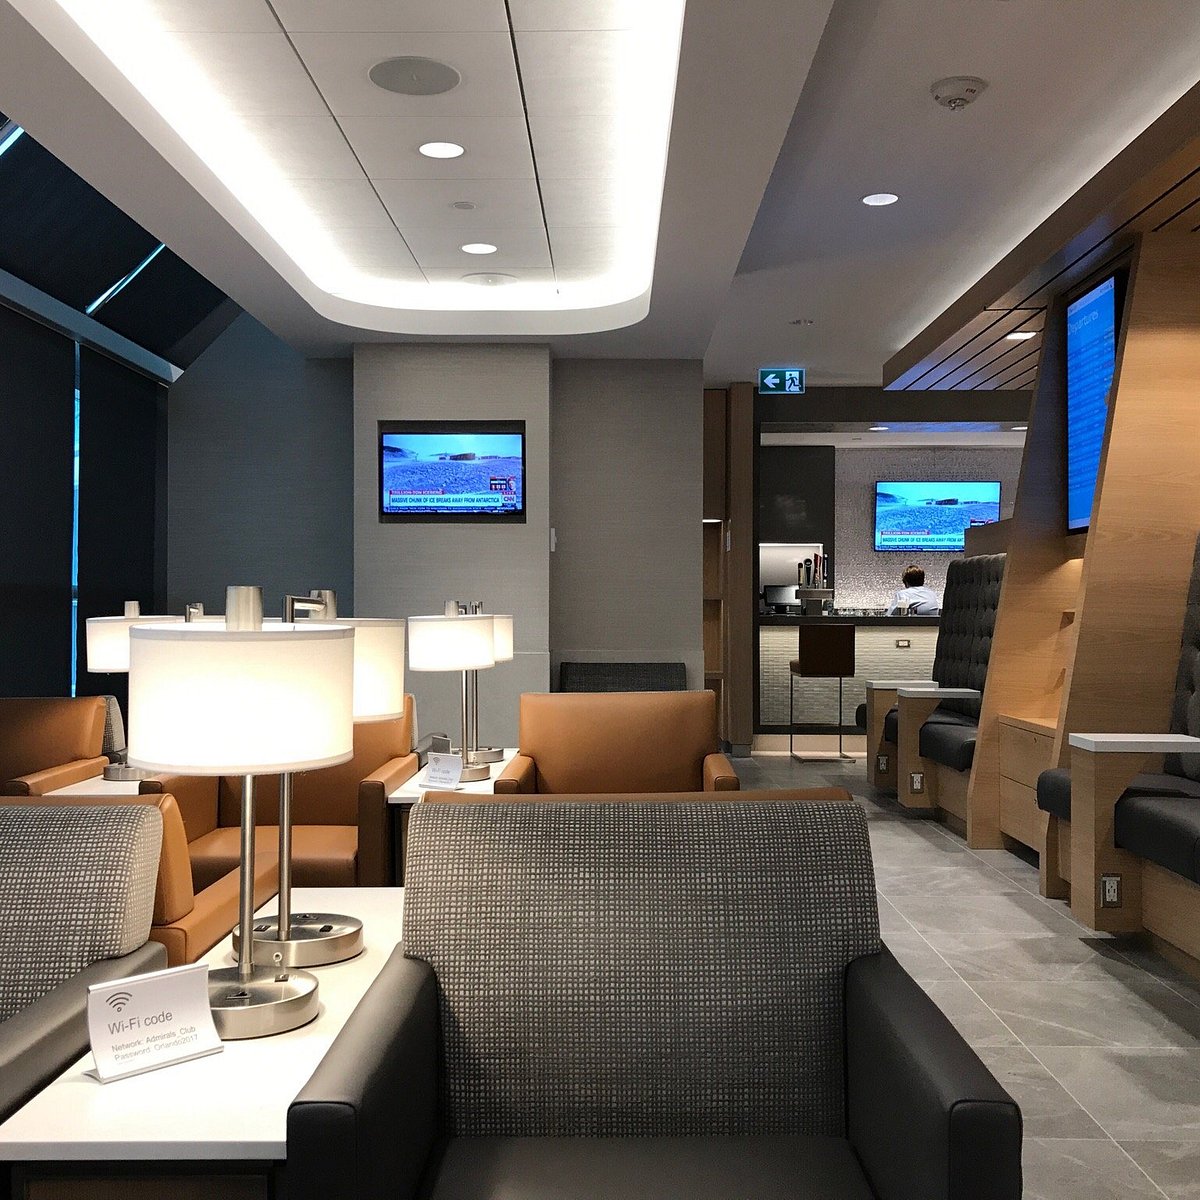 How to get access to American Airlines' Admirals Club lounges